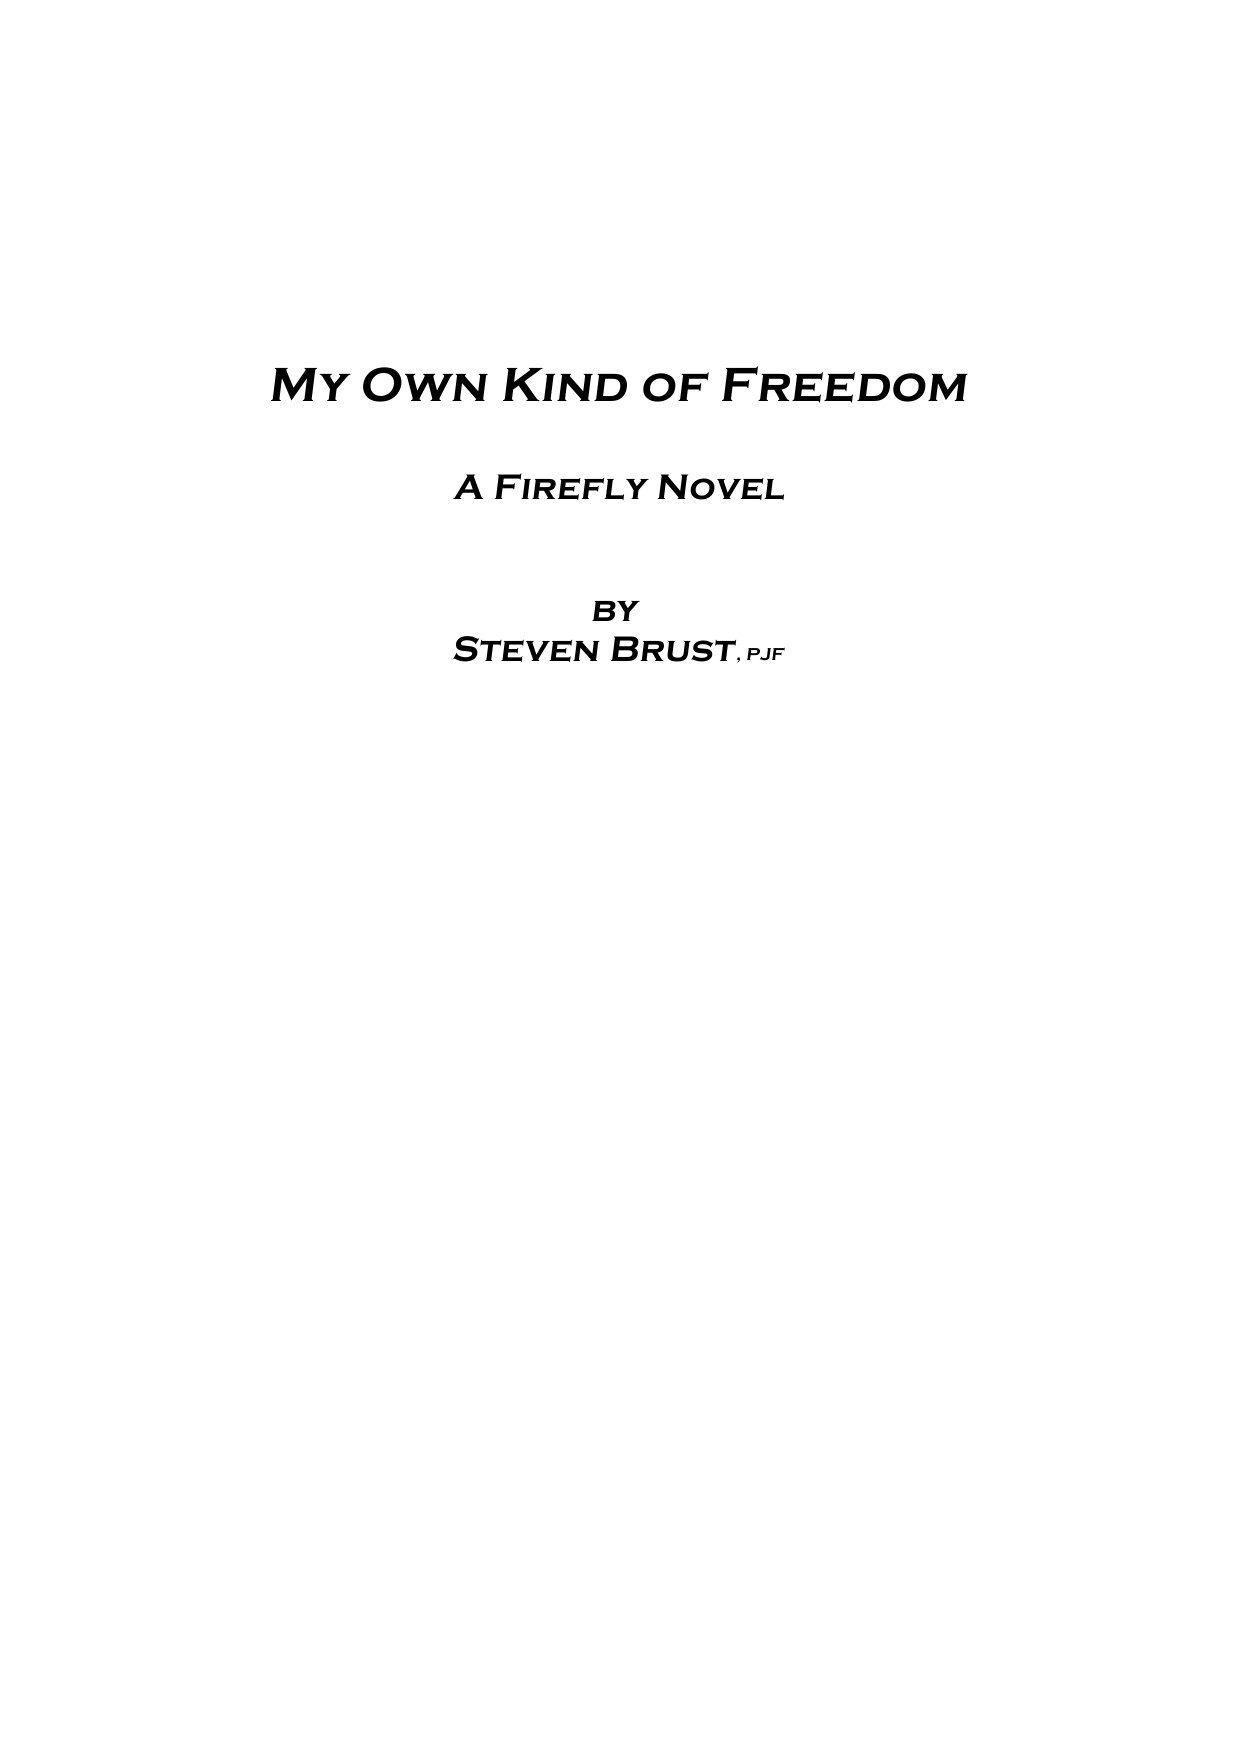 My Own Kind of Freedom: A Firefly Novel